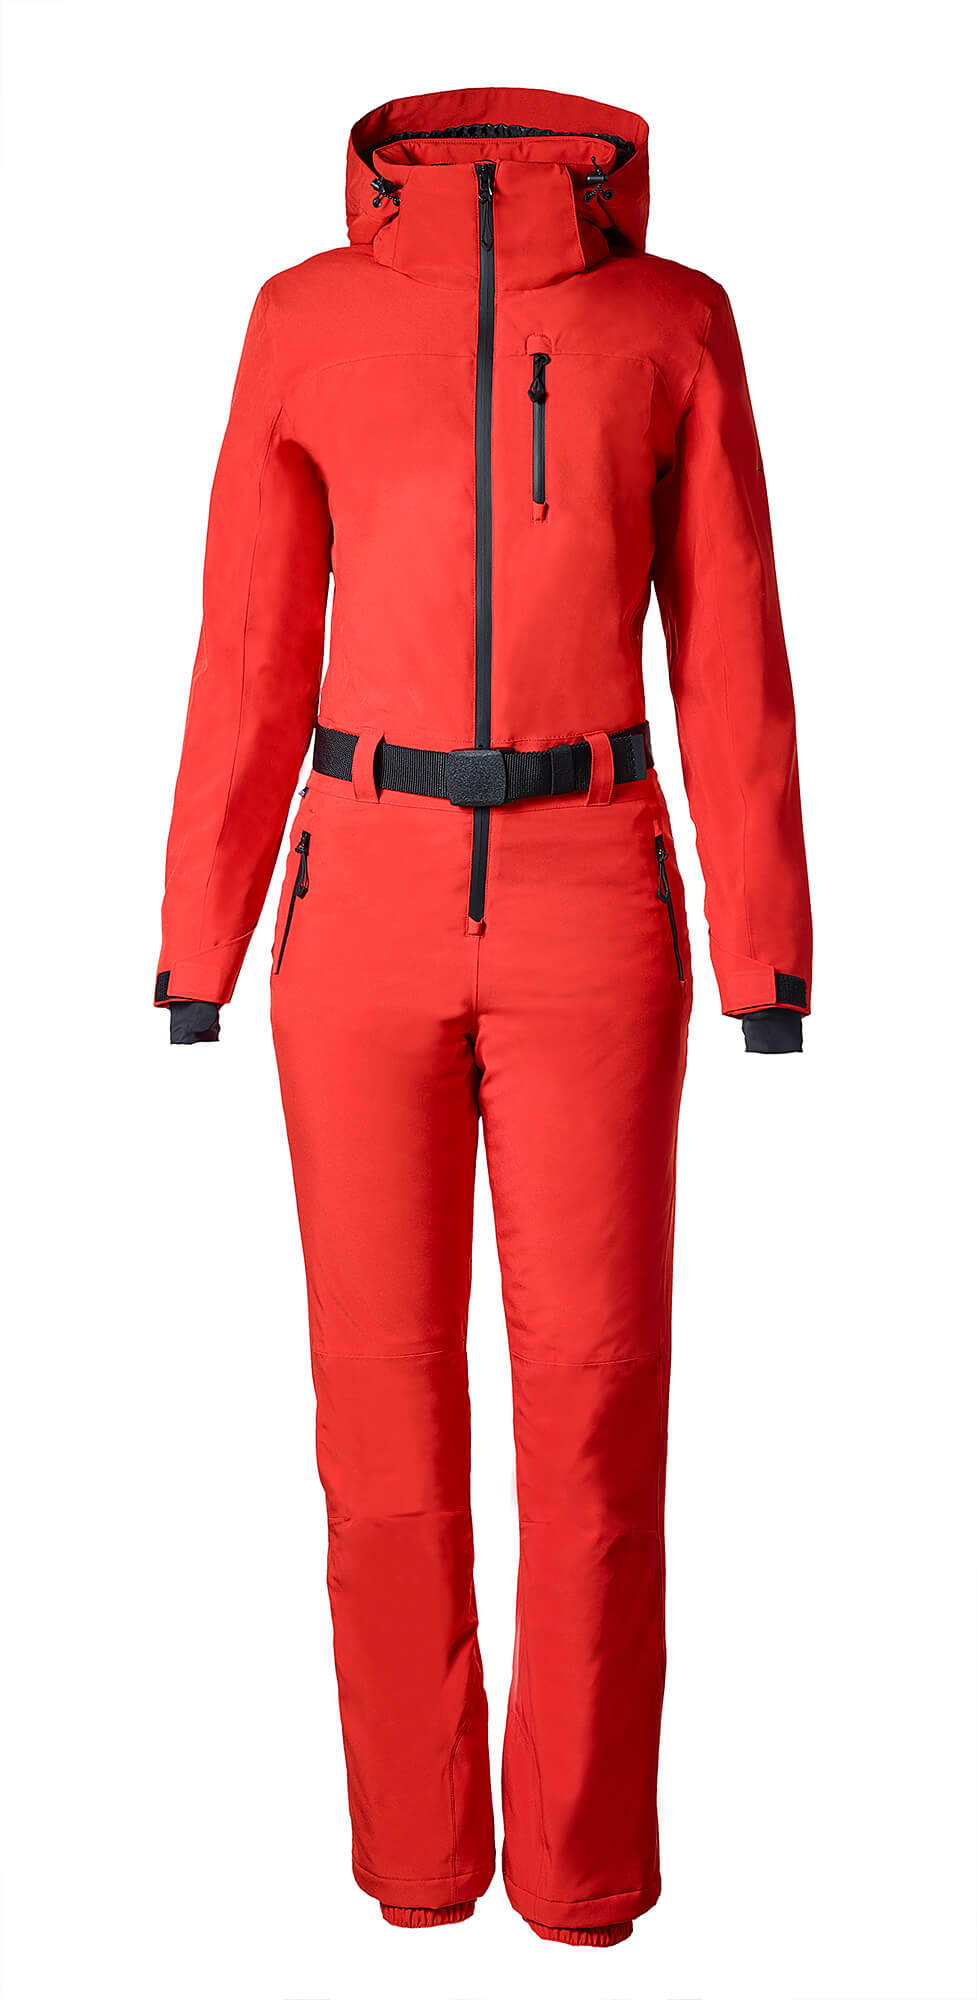 Insulated one-piece suit Bond Girl - Women’s - 60% Off !